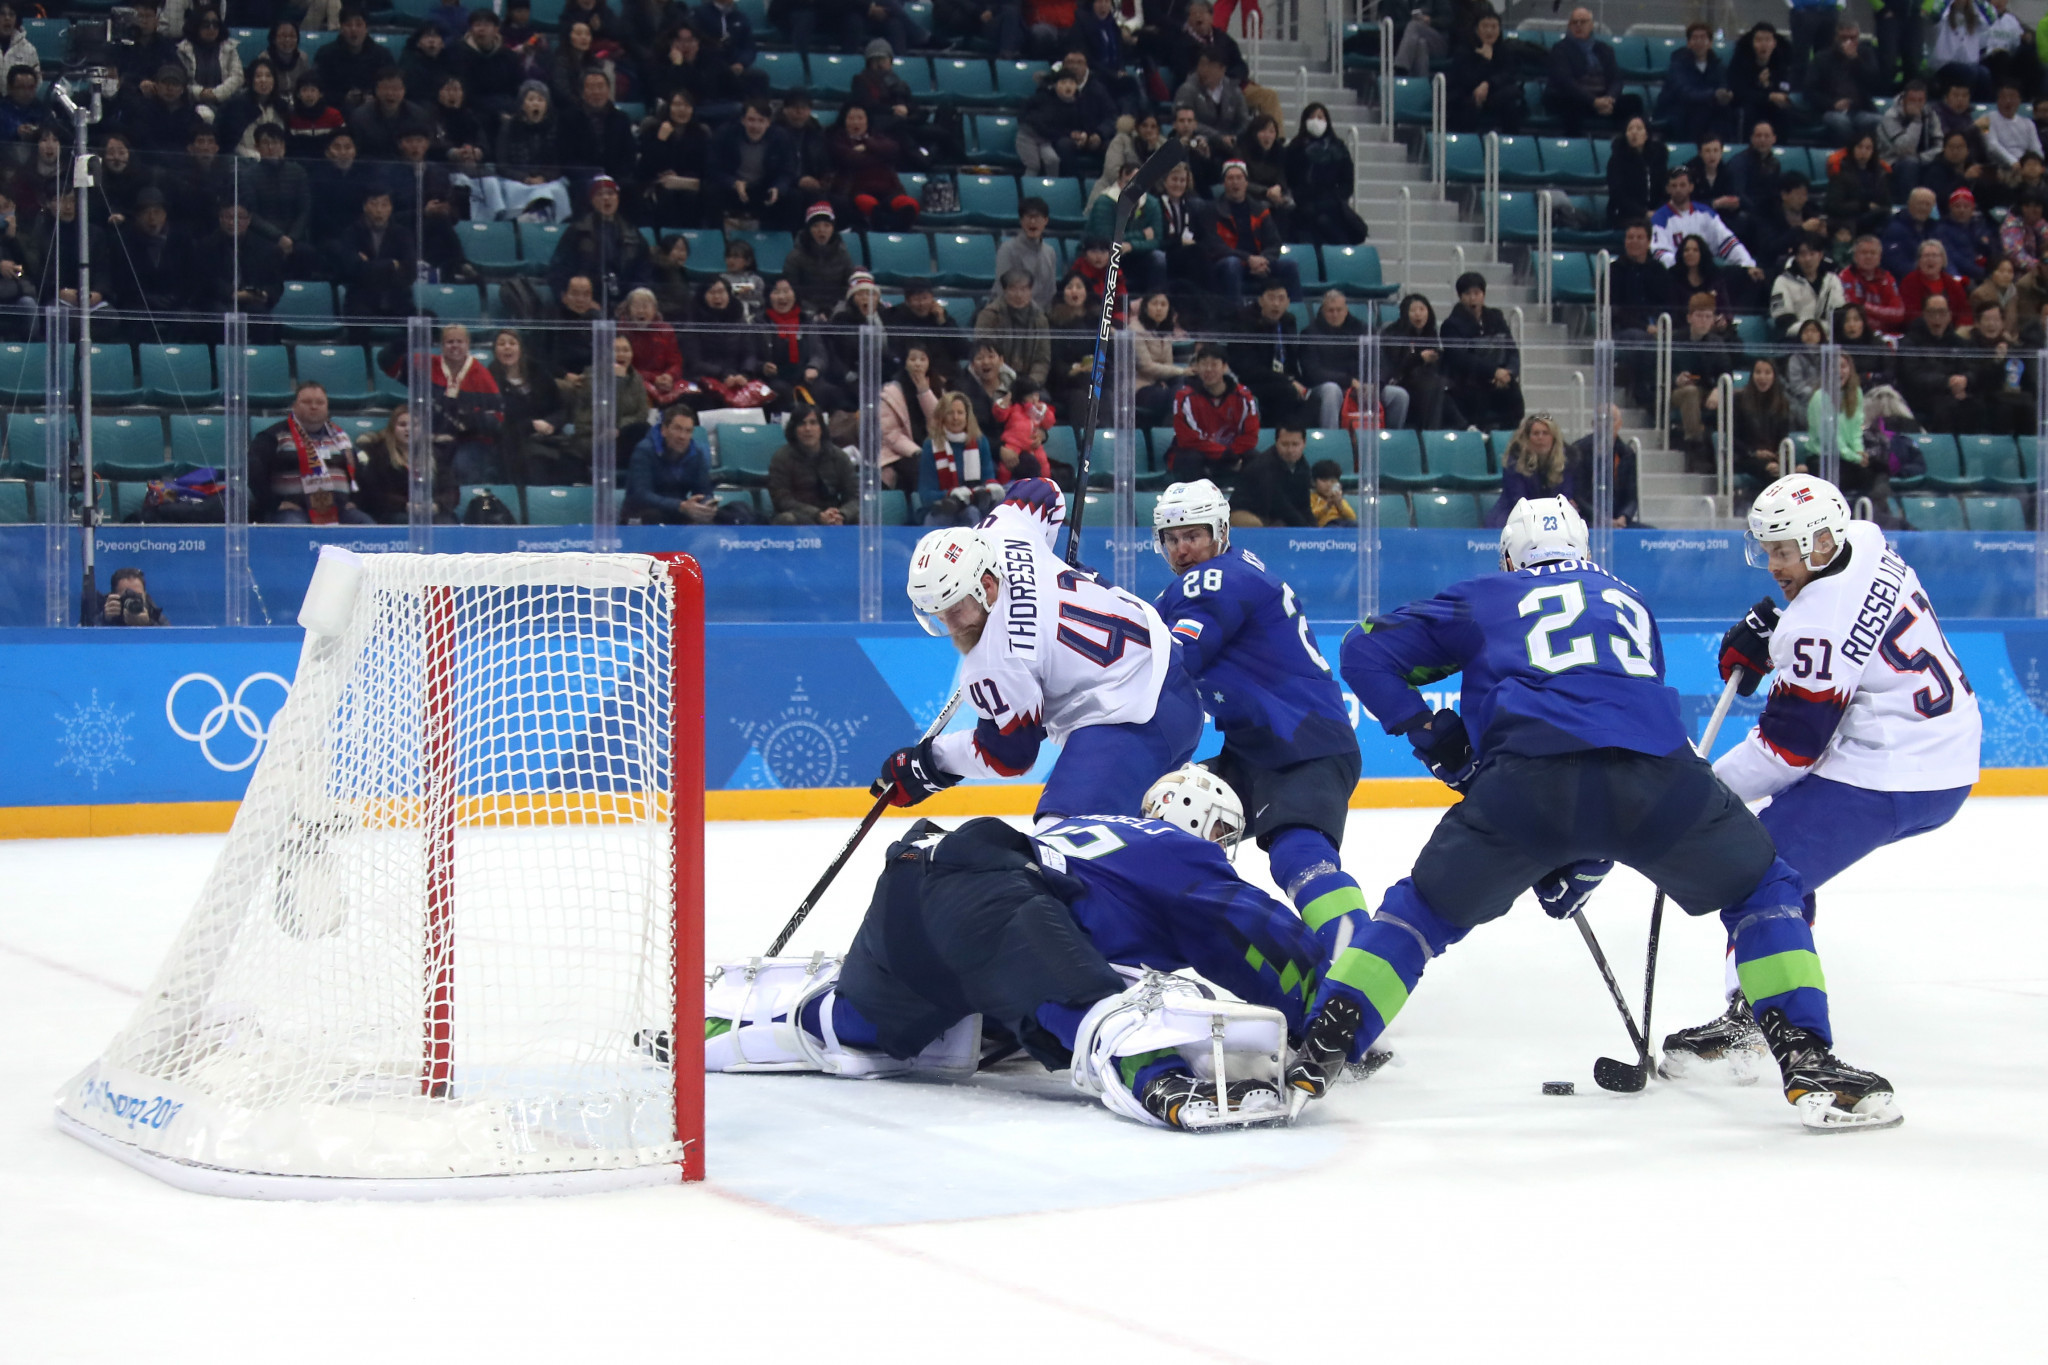 IIHF Olympic Pre-Qualification Round 3 starts in Nur-Sultan, Jesenice and Nottingham